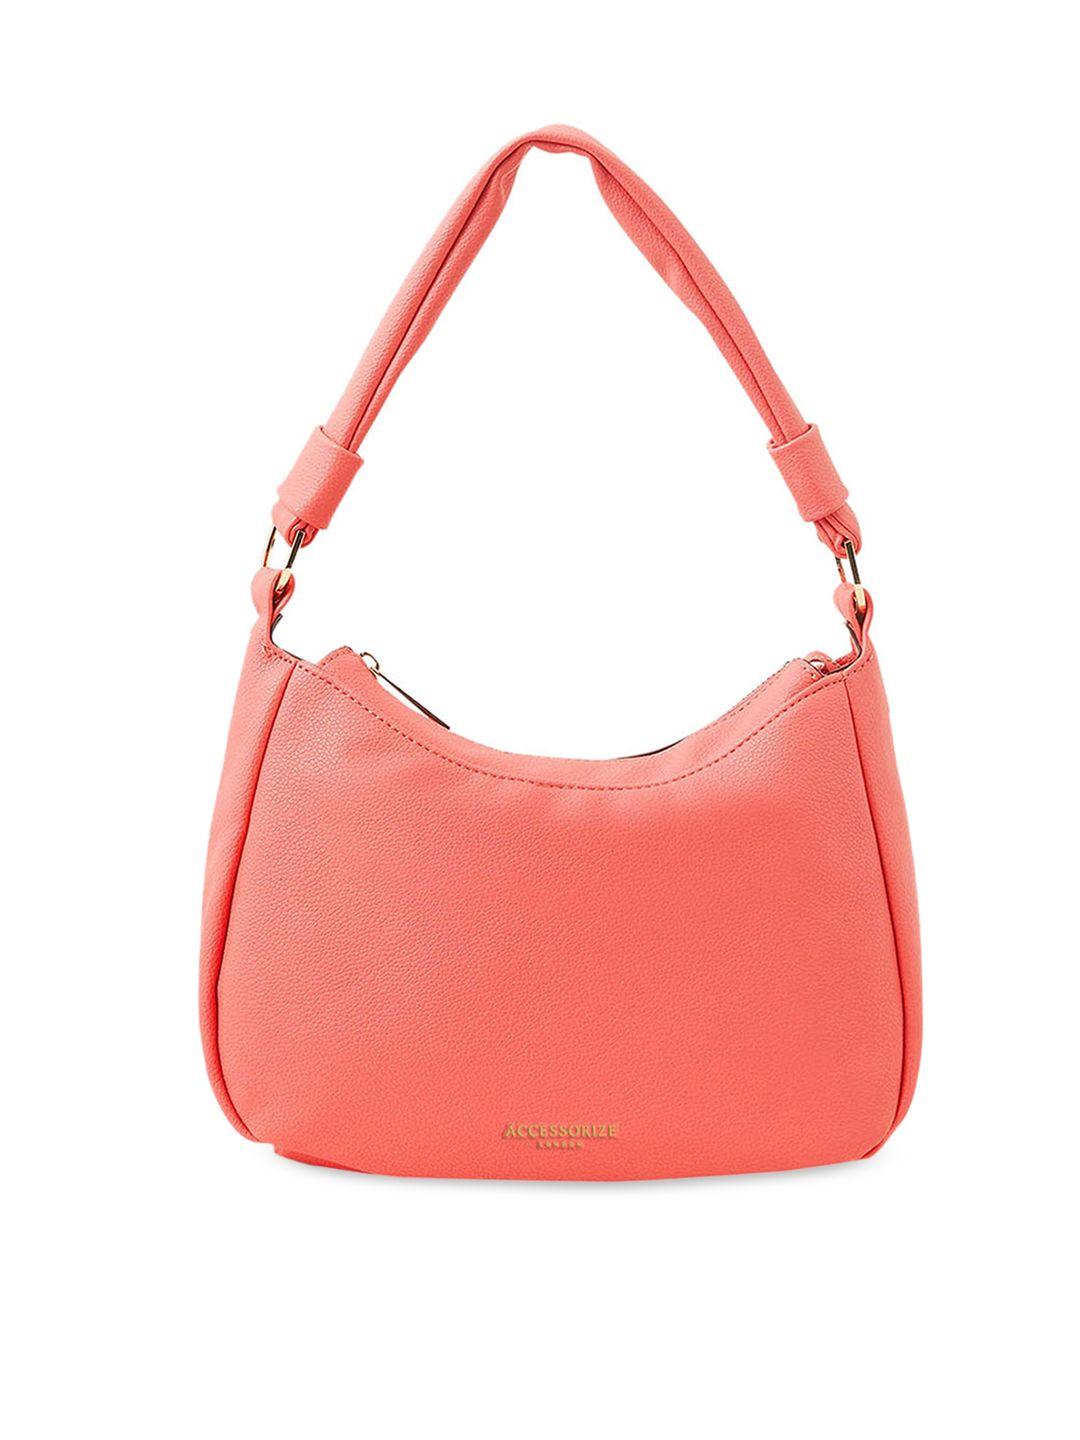 accessorize structured hobo bag